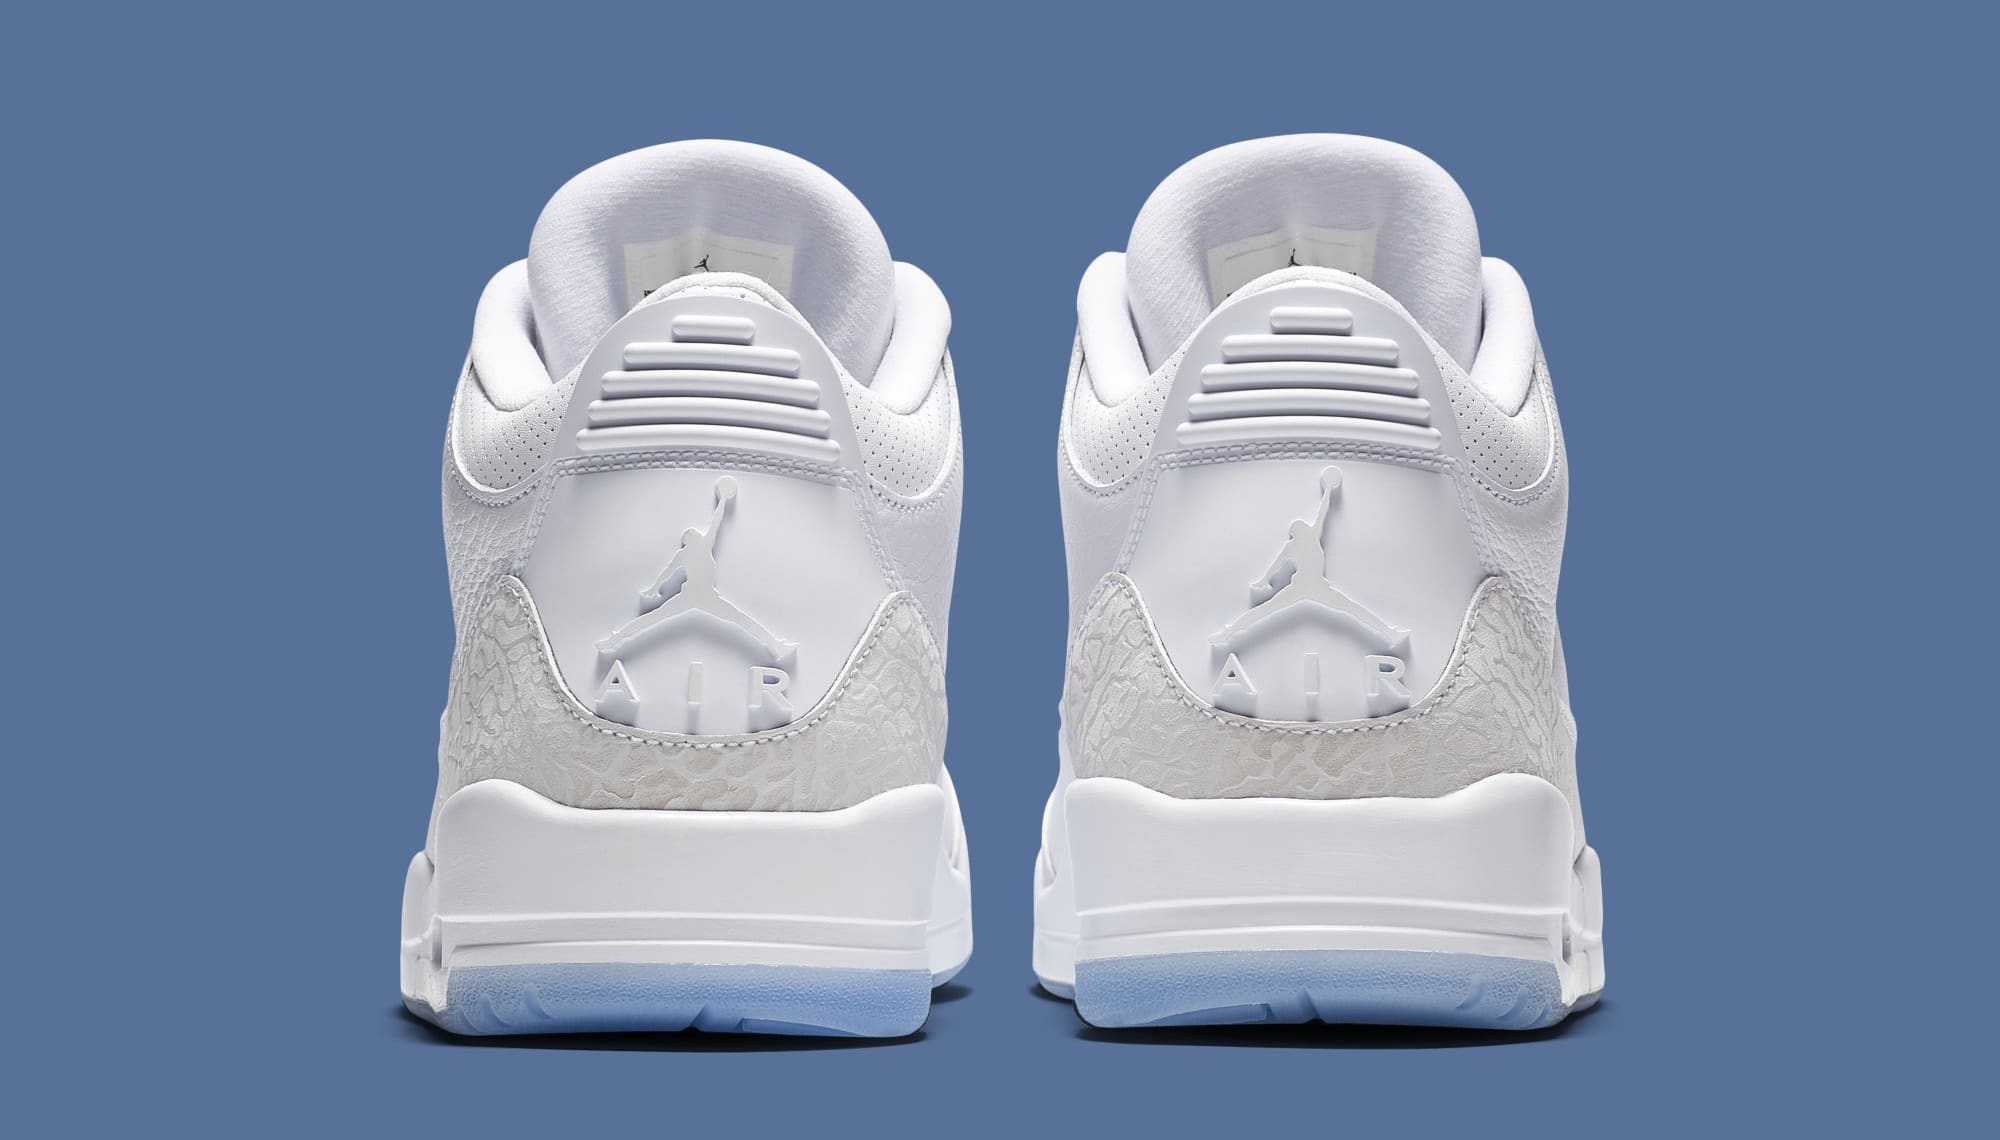 Pacific Decay shade Air Jordan 3 'Triple White' 136064-111 Release Date | Sole Collector